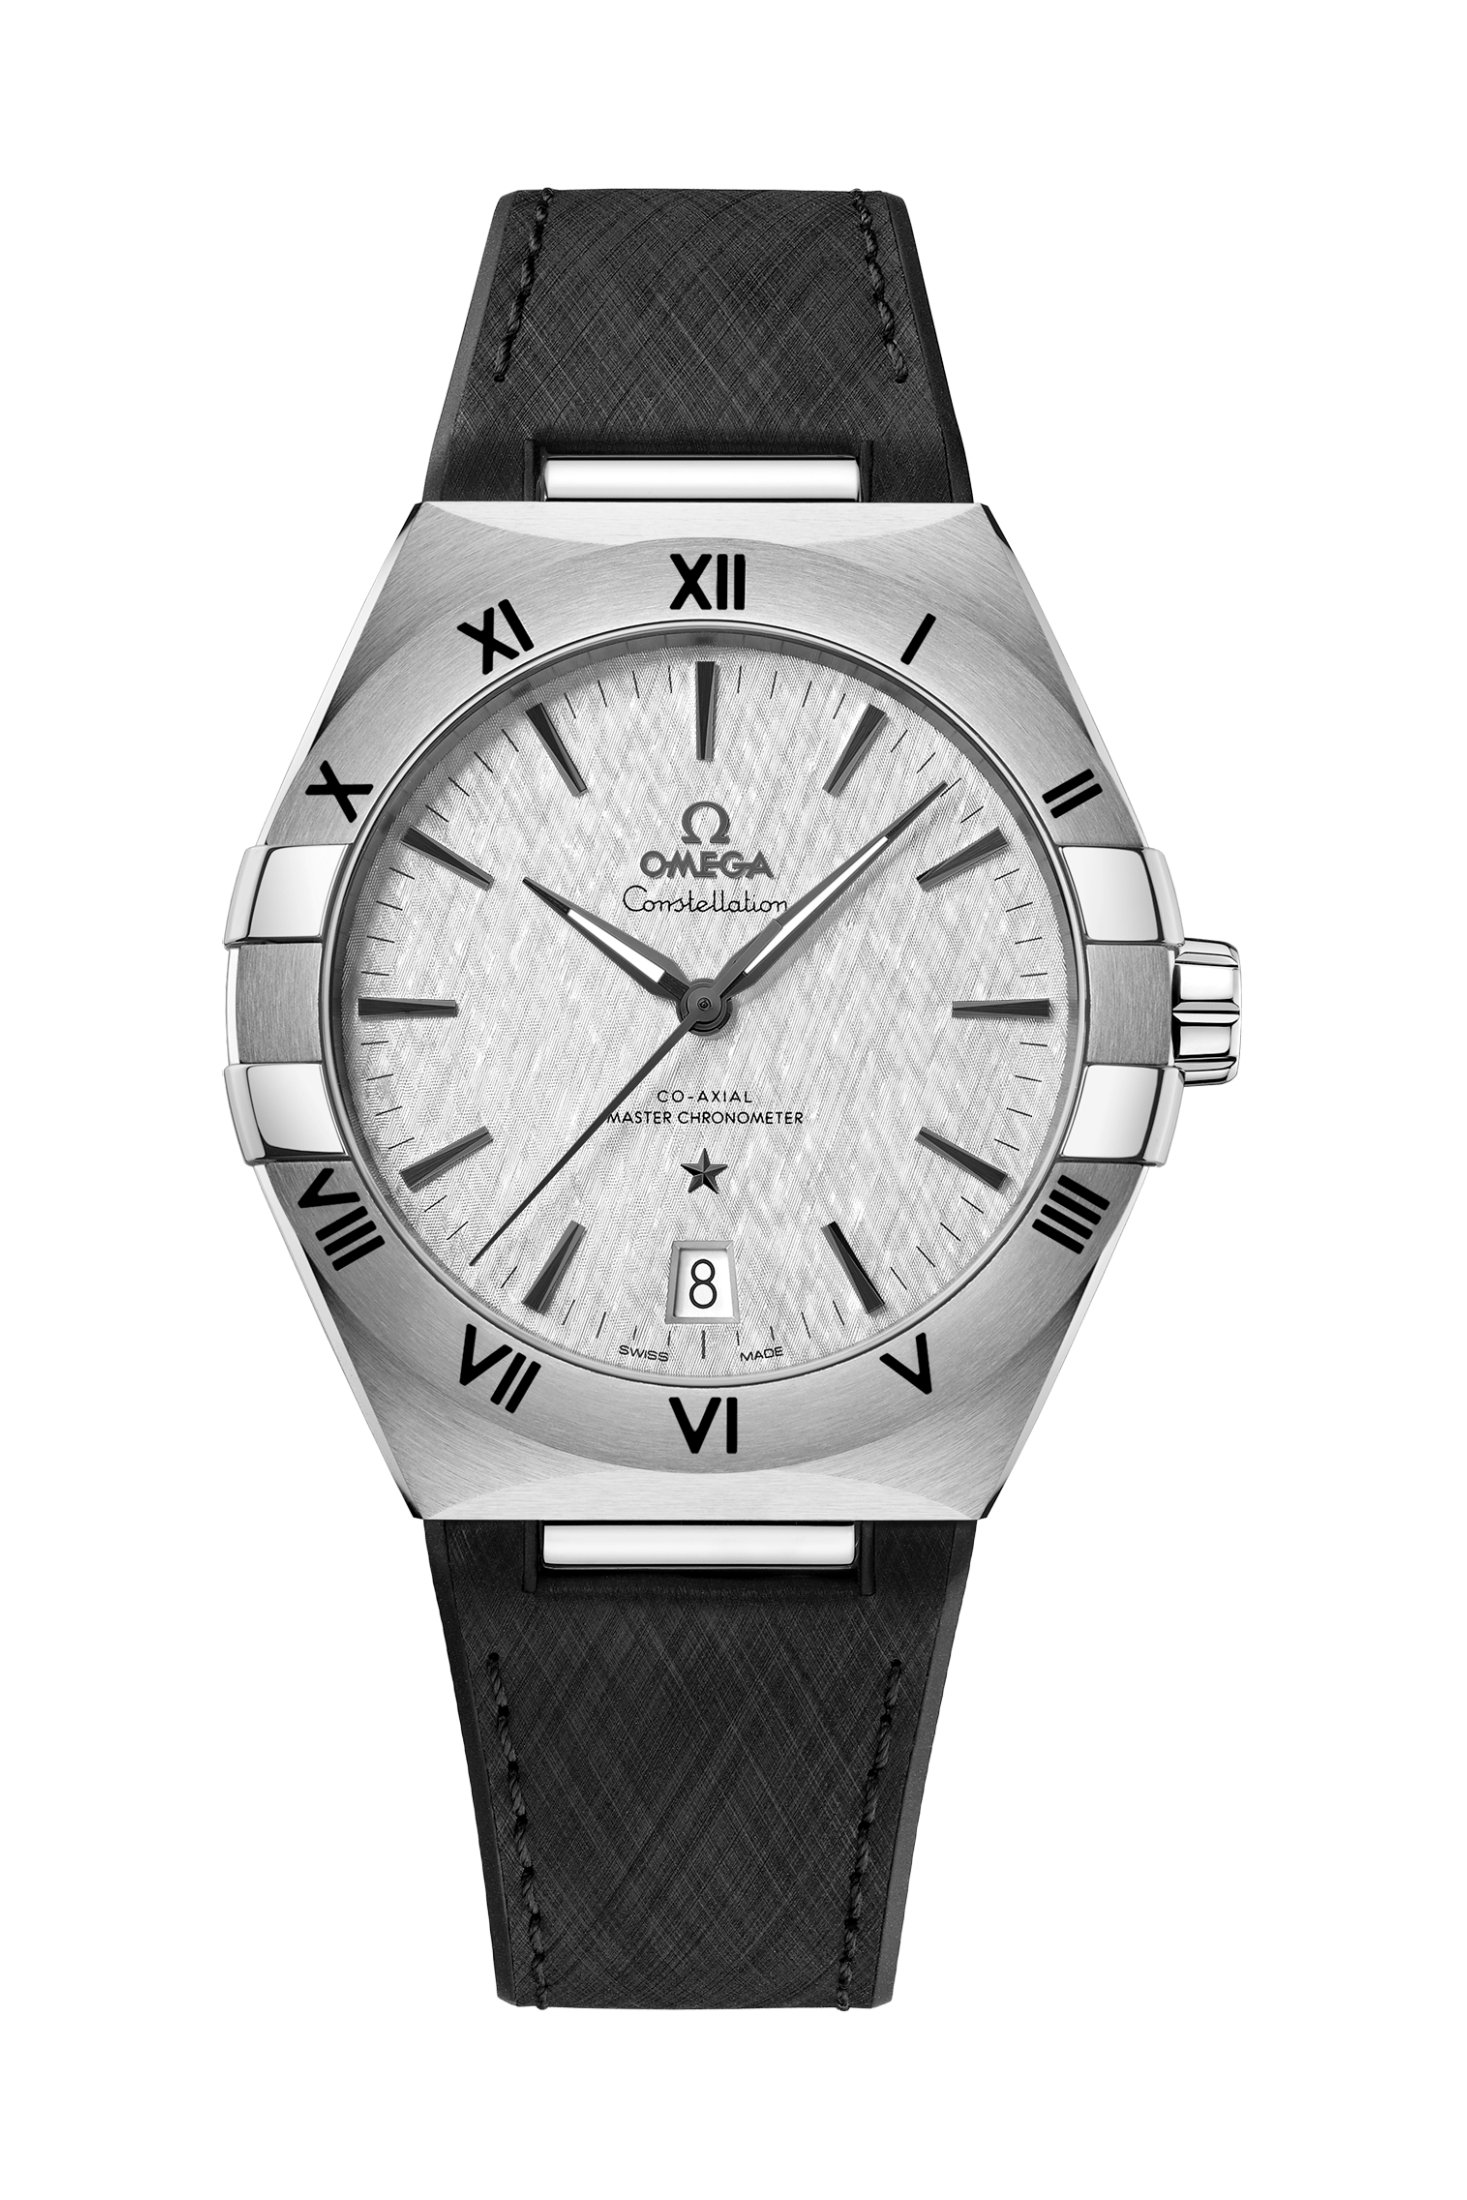 Men's watch / unisex  OMEGA, Constellation Co Axial Master Chronometer / 41mm, SKU: 131.12.41.21.06.001 | watchapproach.com